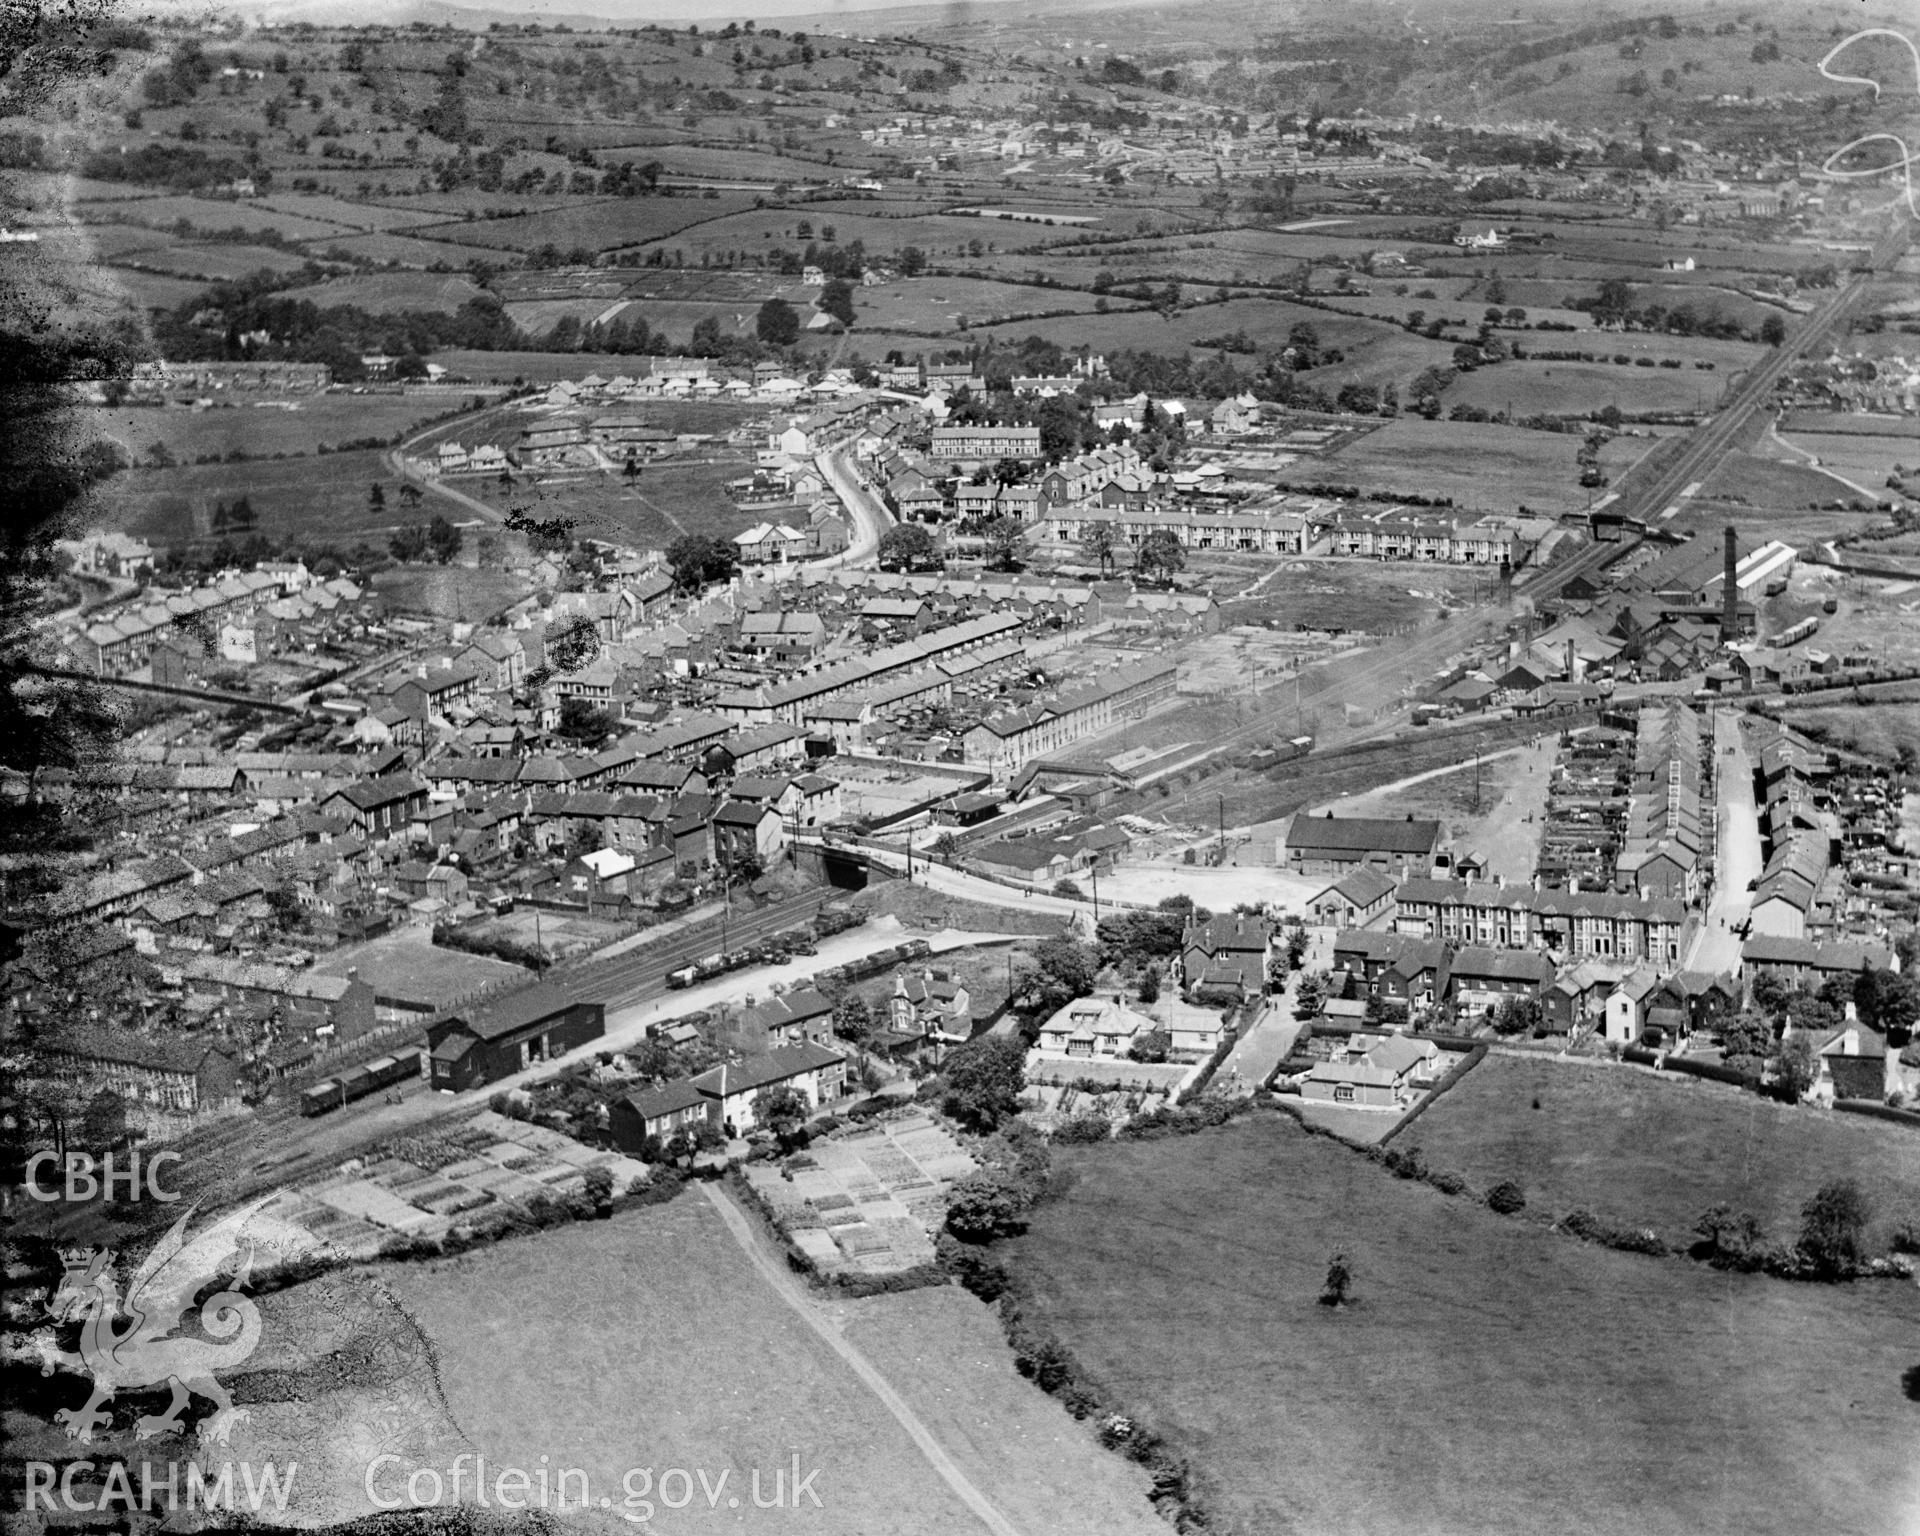 General view of Pontnewydd, oblique aerial view. 5?x4? black and white glass plate negative.